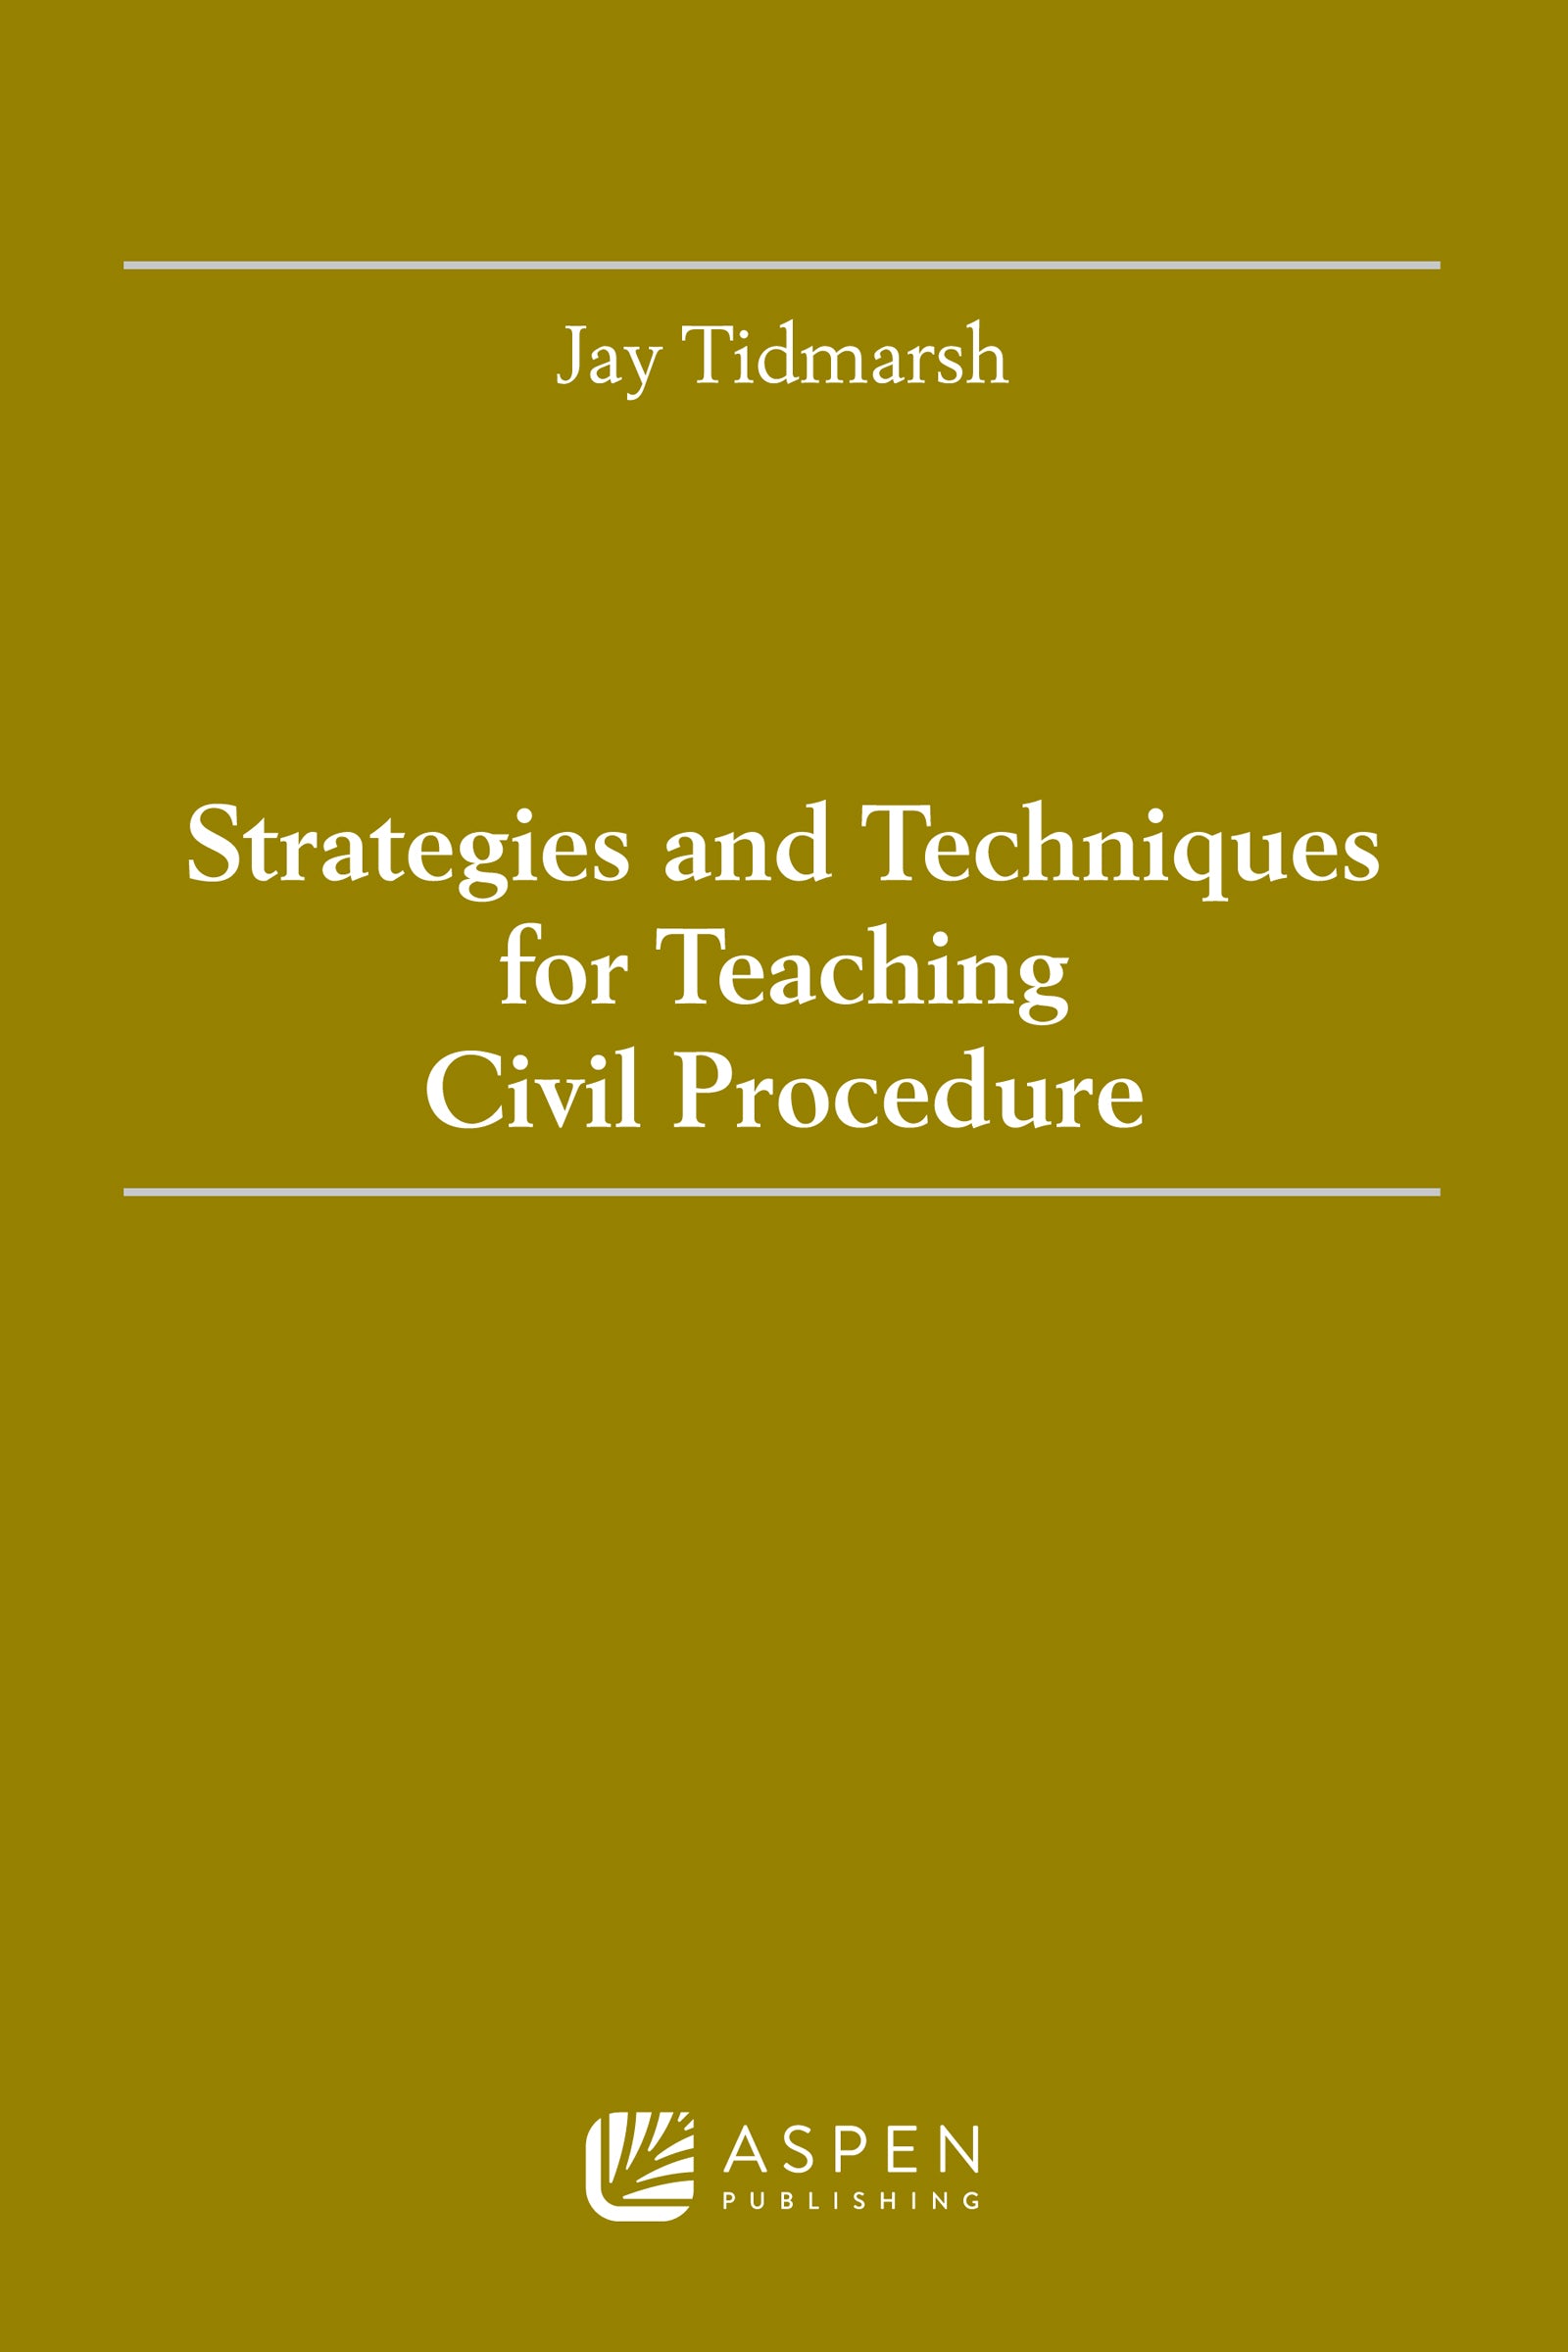 Strategies and Techniques for Teaching Civil Procedure